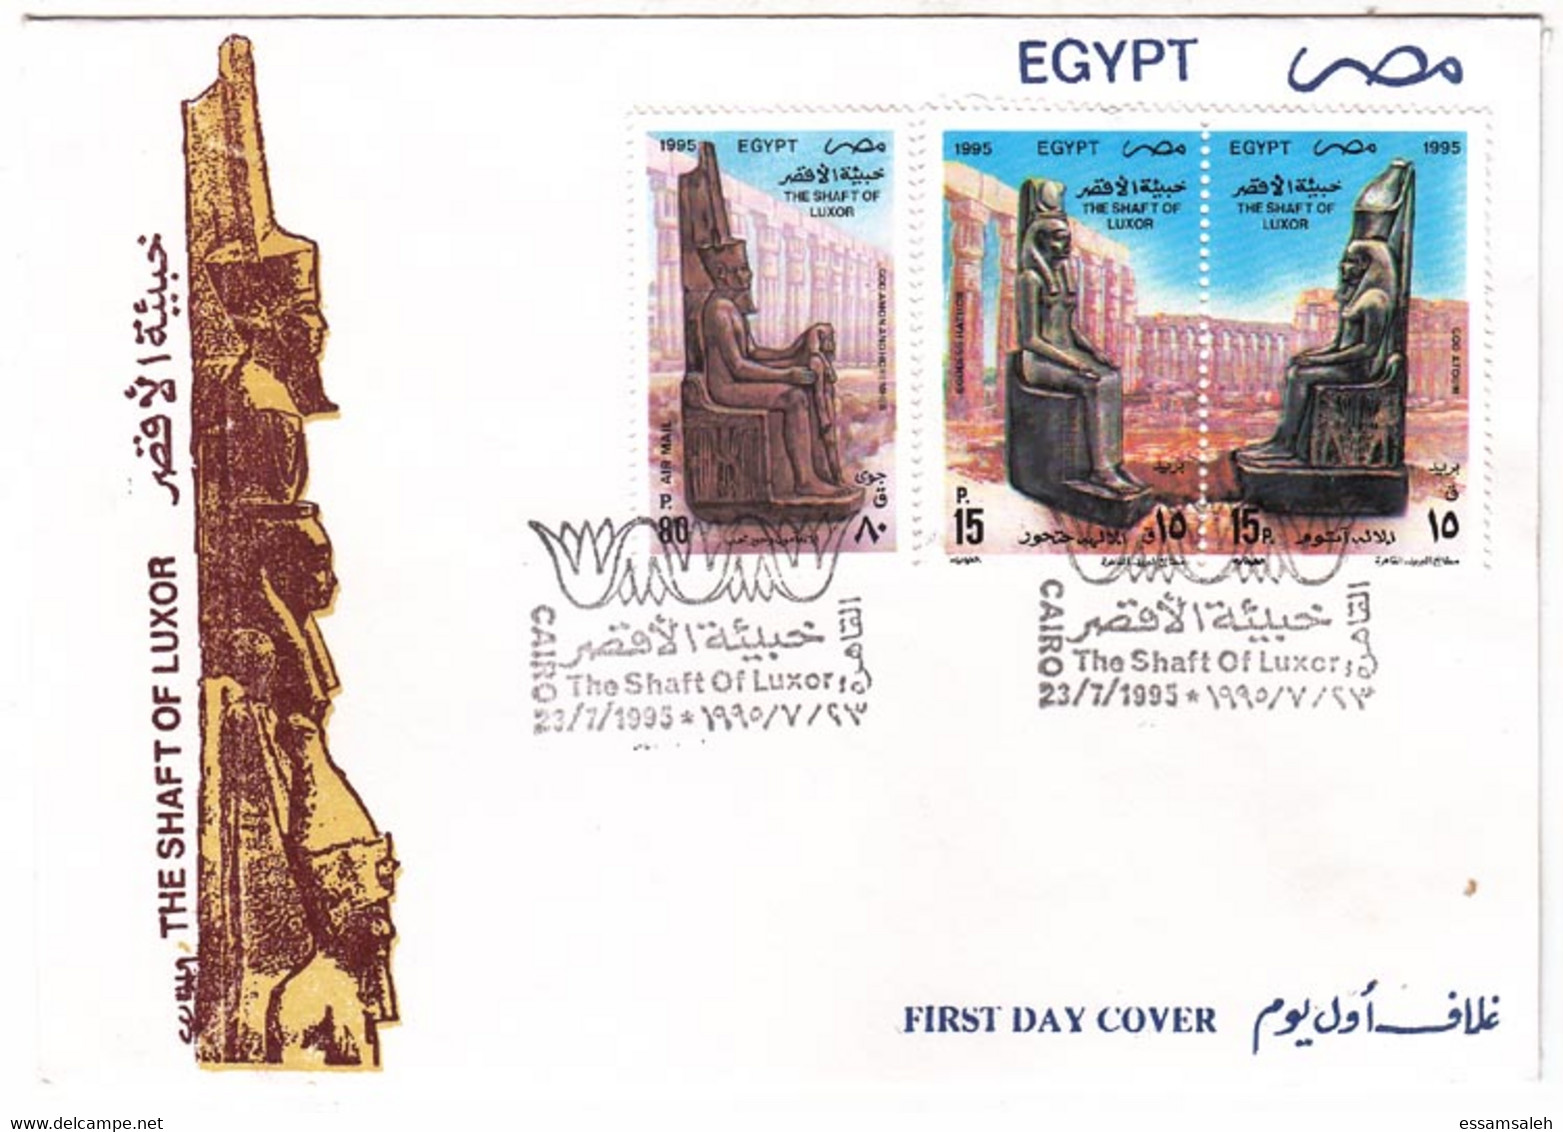 EGS30608 Egypt 1995 Illustrated FDC The Shaft Of Luxor - Statues Of The Gods Hathor, Atum, Amun, And Horemheb - Storia Postale